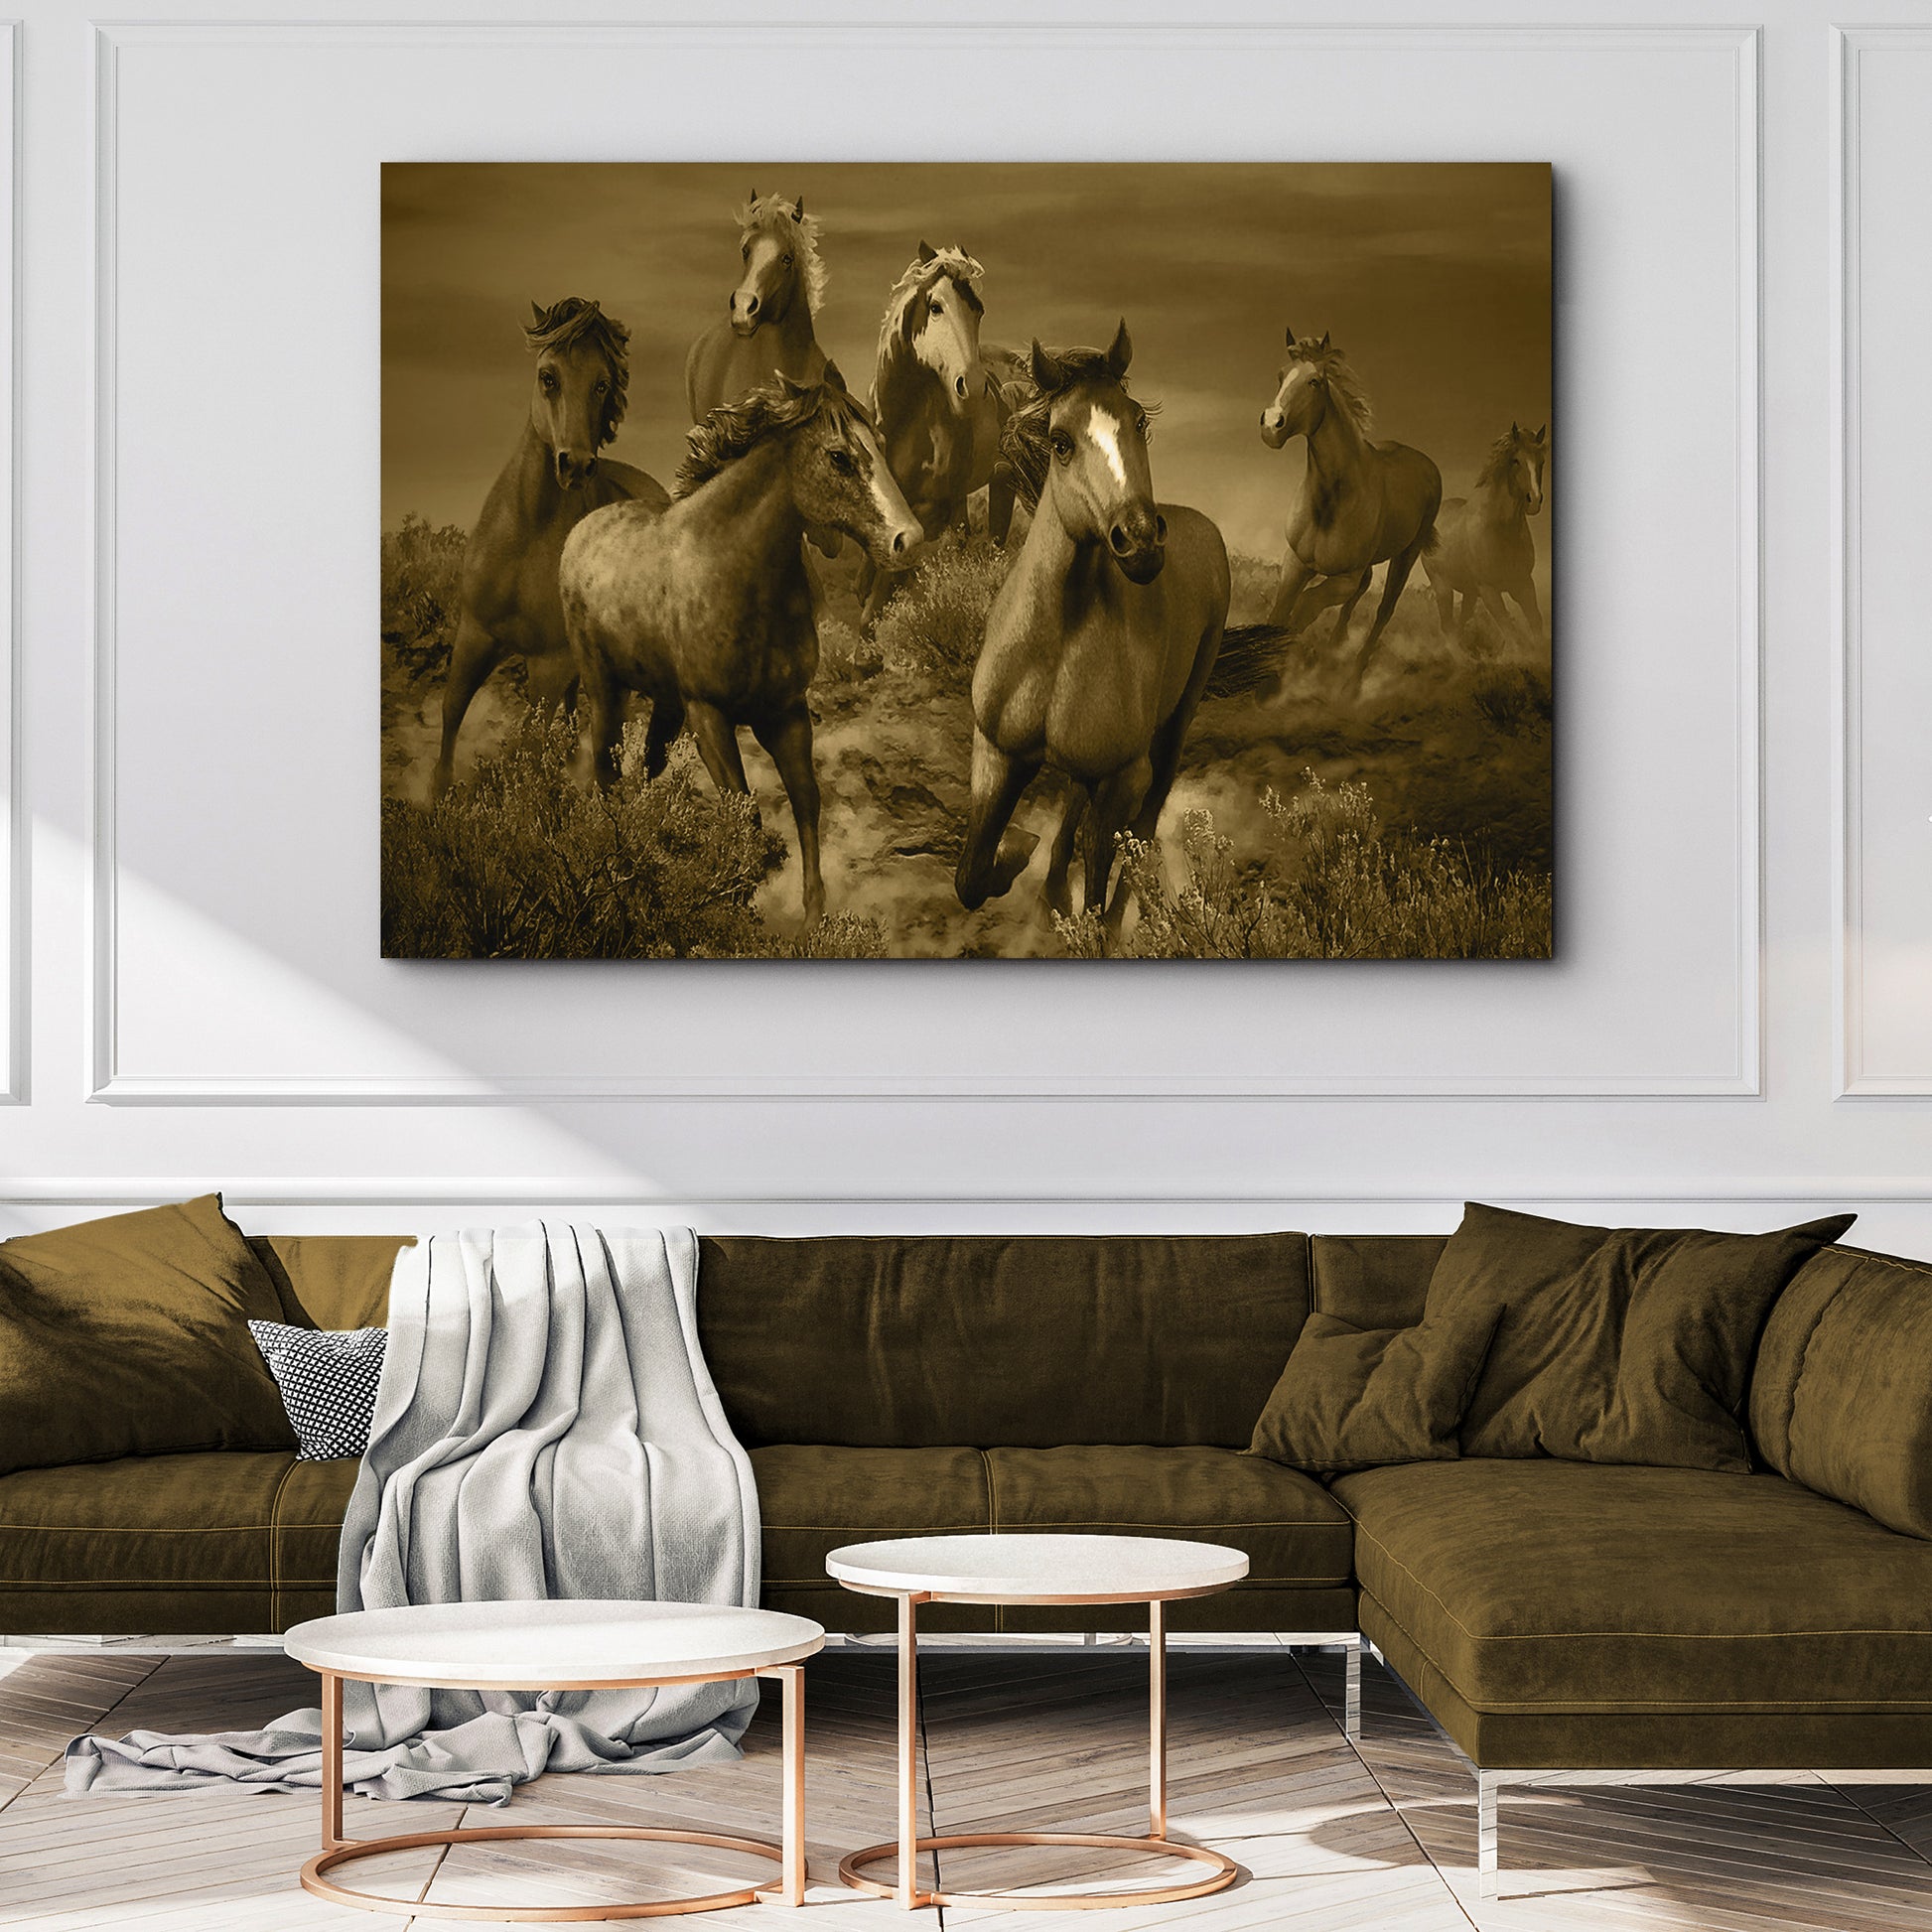 Rustic Herd Of Horses Canvas Wall Art Style 2 - Image by Tailored Canvases